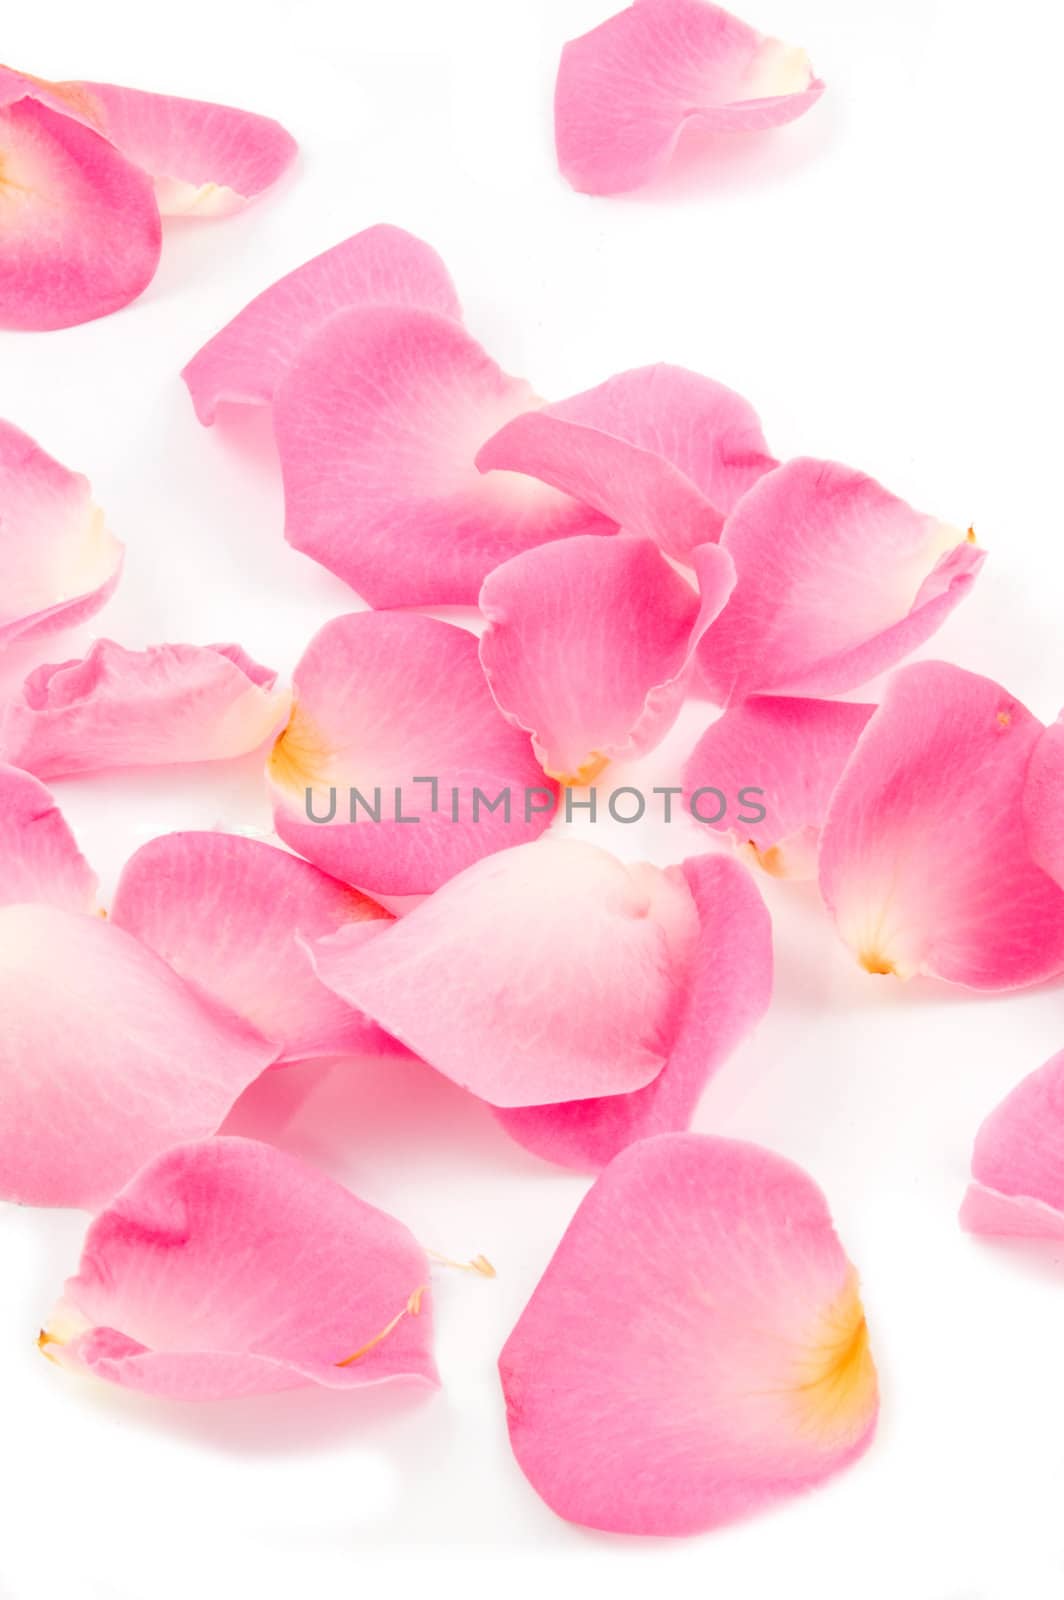 Lots of rose leafs on white background by ladyminnie